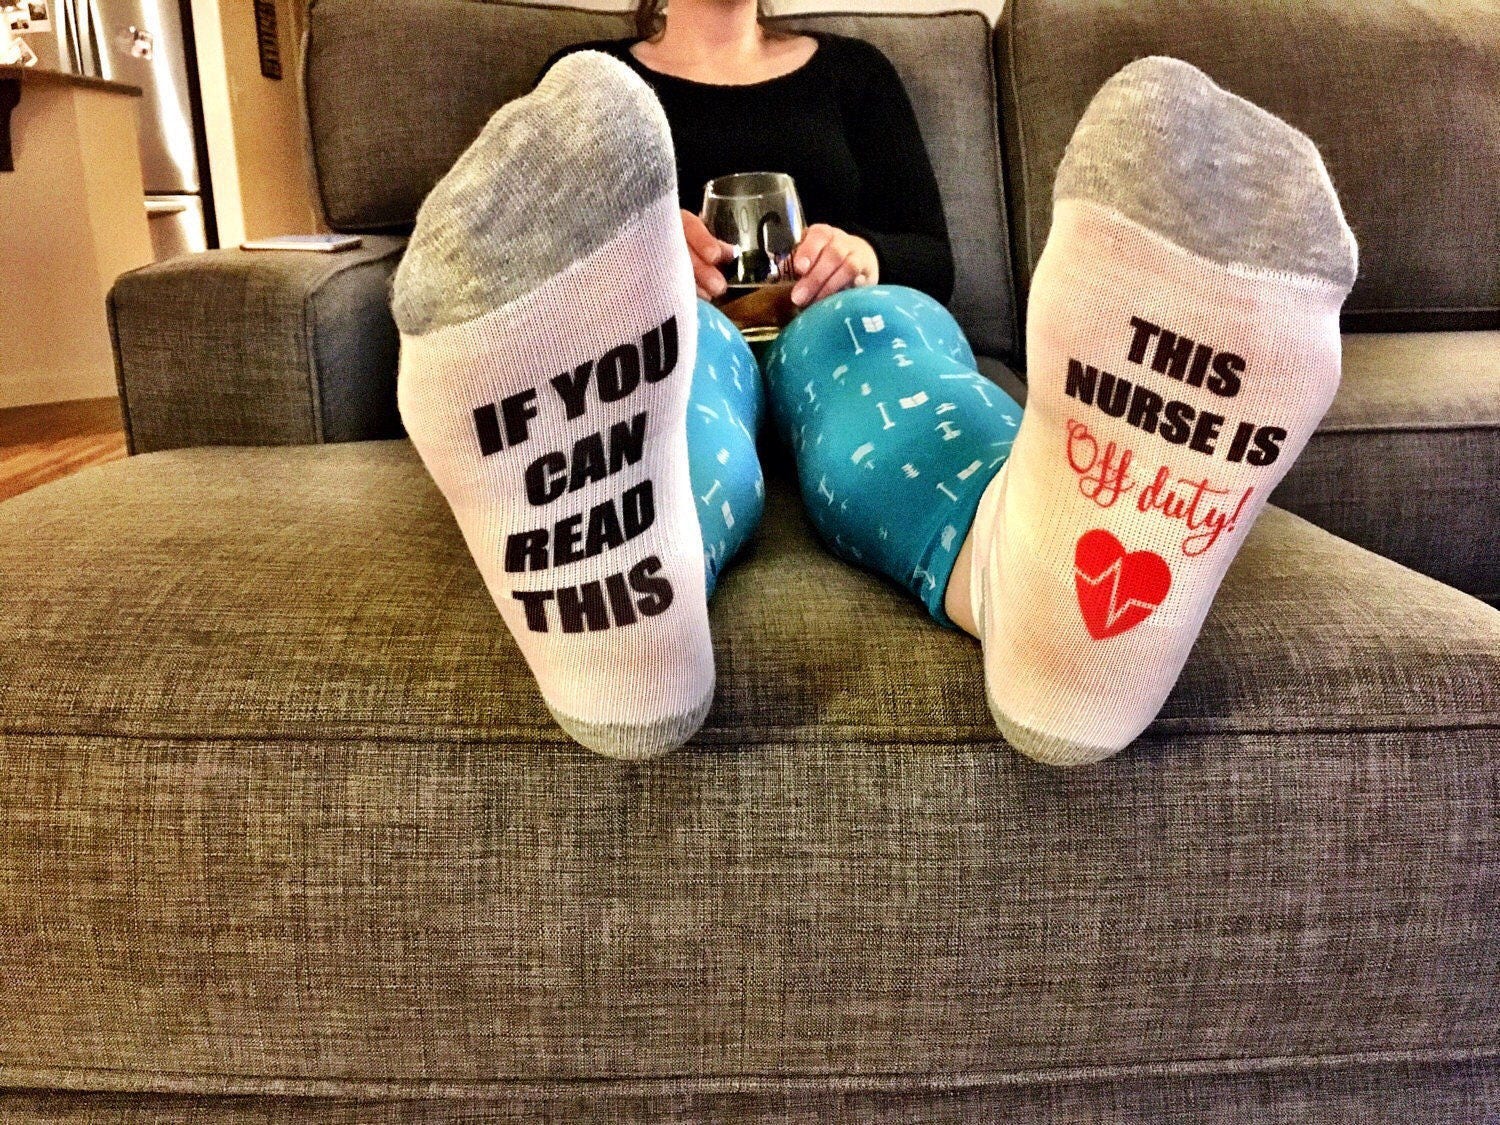 nurses week / if you can read this sock / this nurse is ...